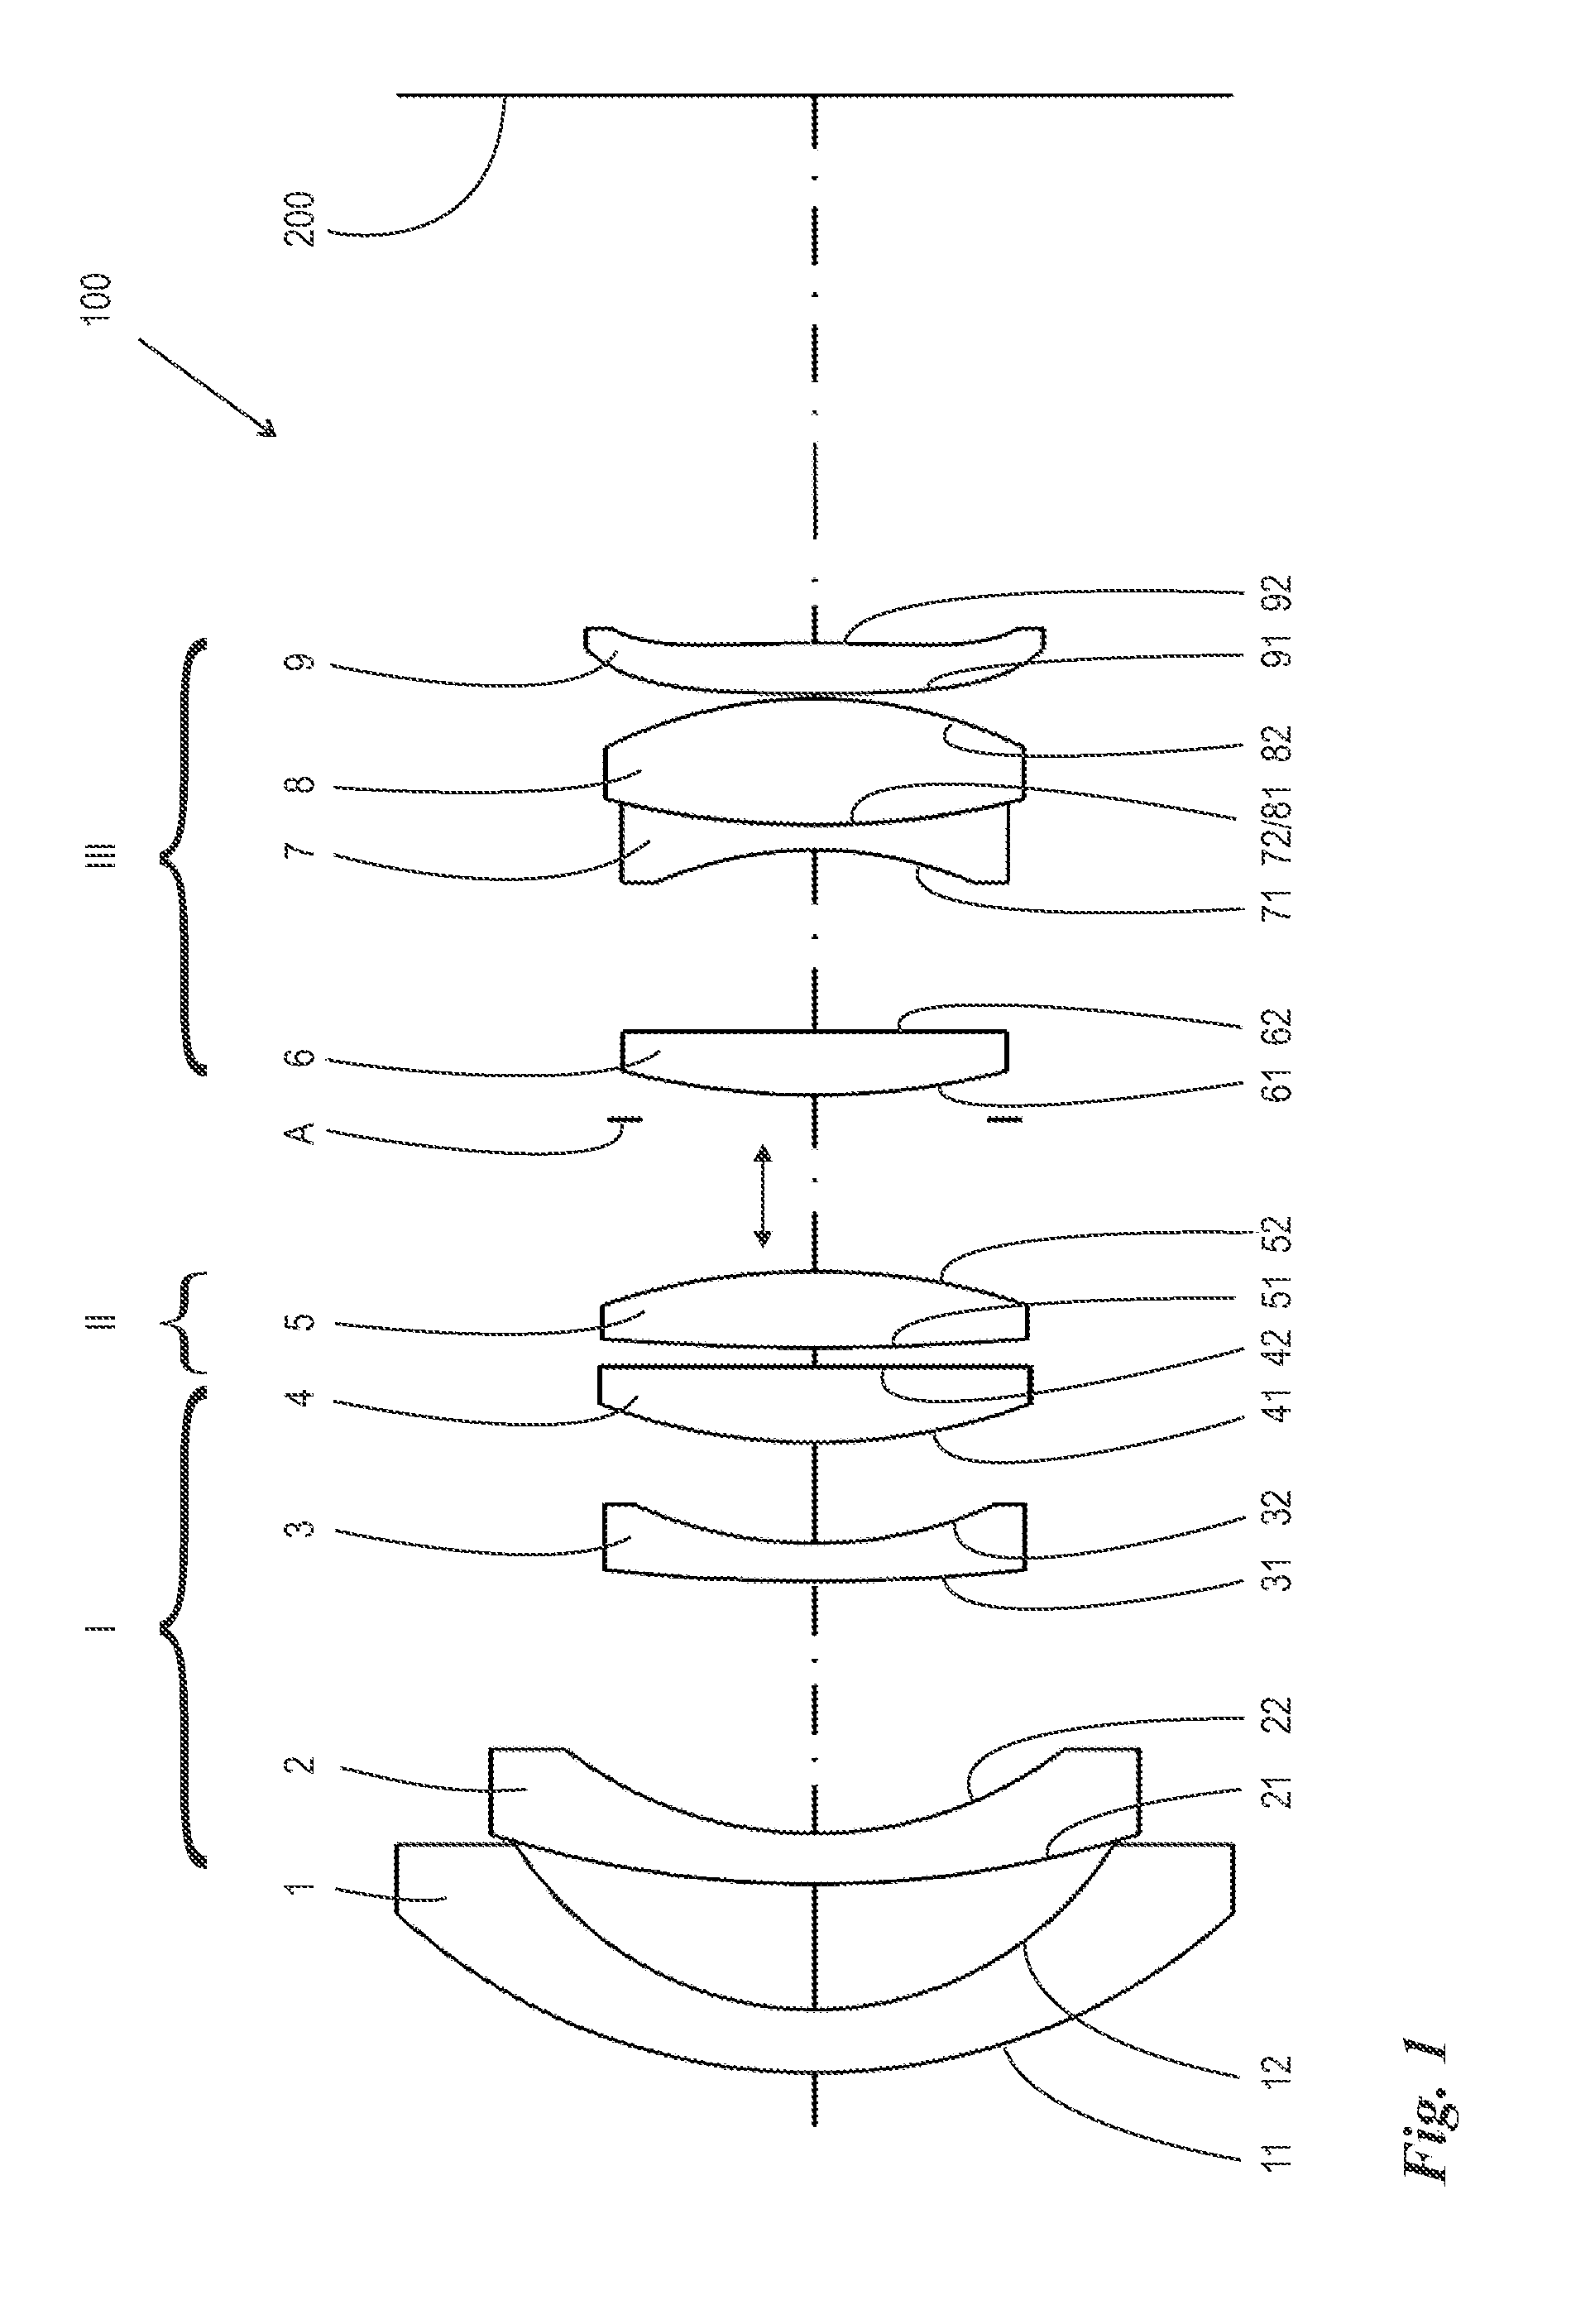 Photographic wide-angle lens system with internal focusing